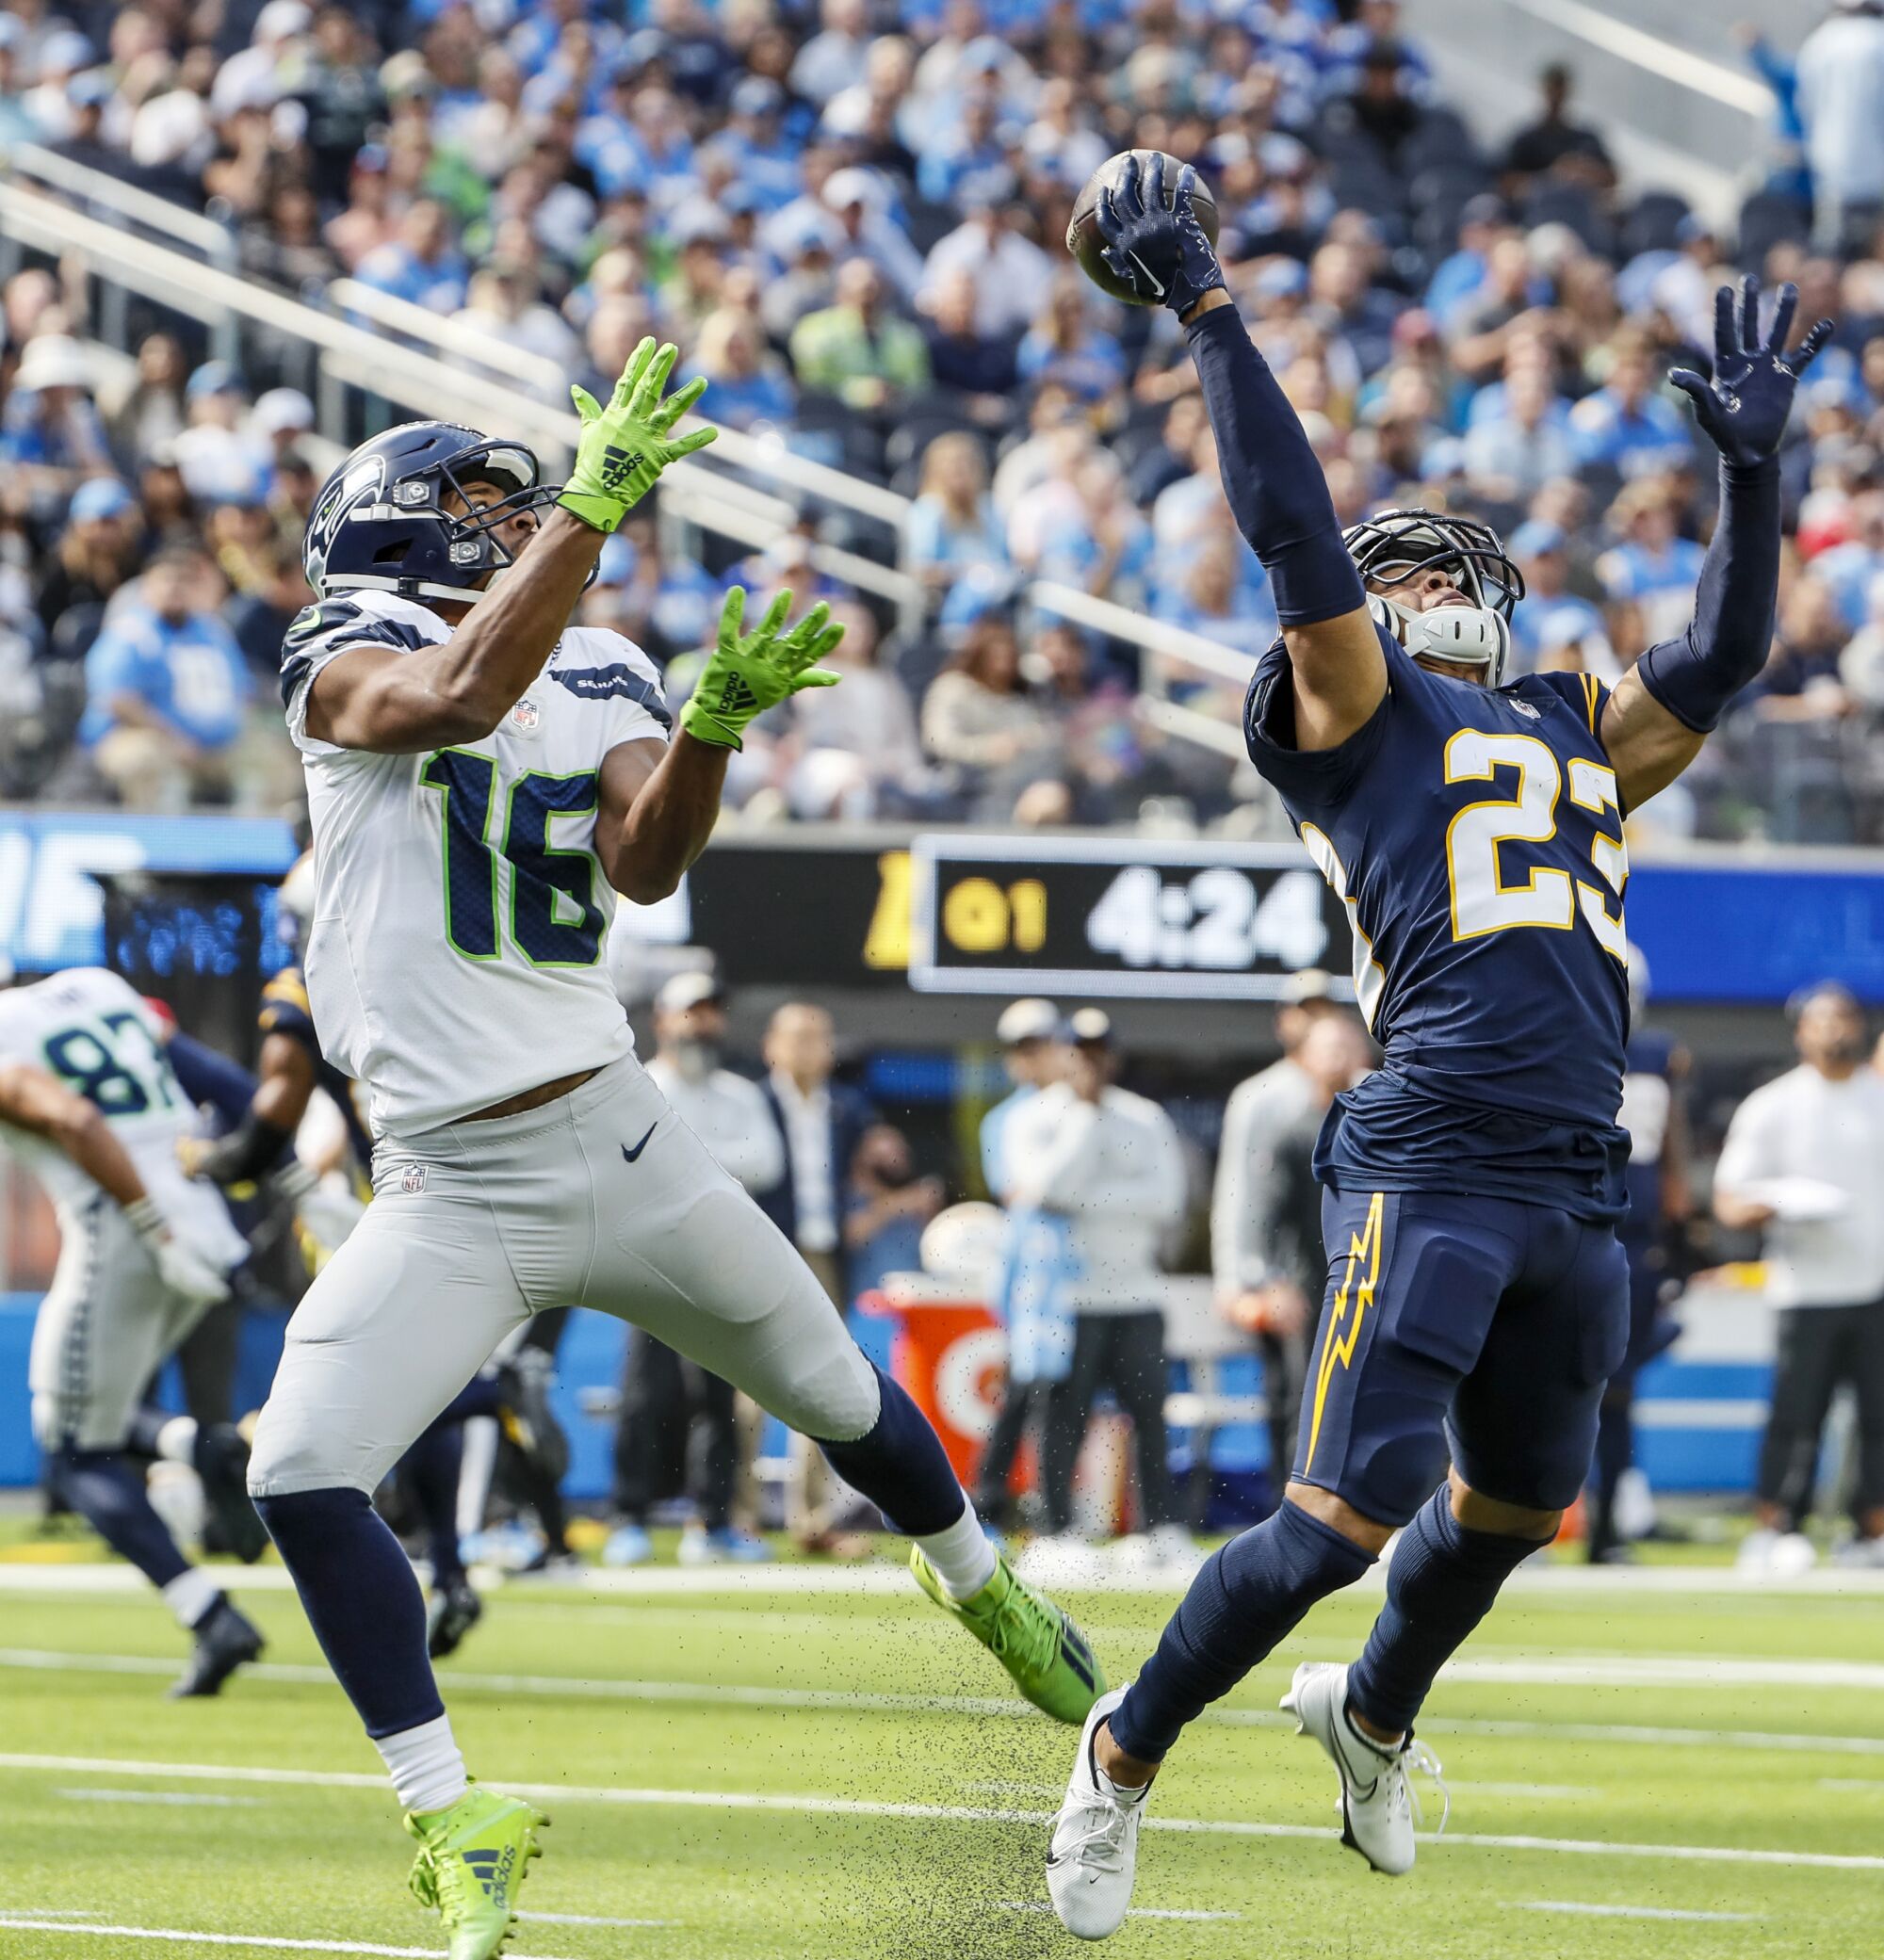 Chargers cornerback Bryce Callahan knocks away a pass intended for Seahawks wide receiver Tyler Lockett.